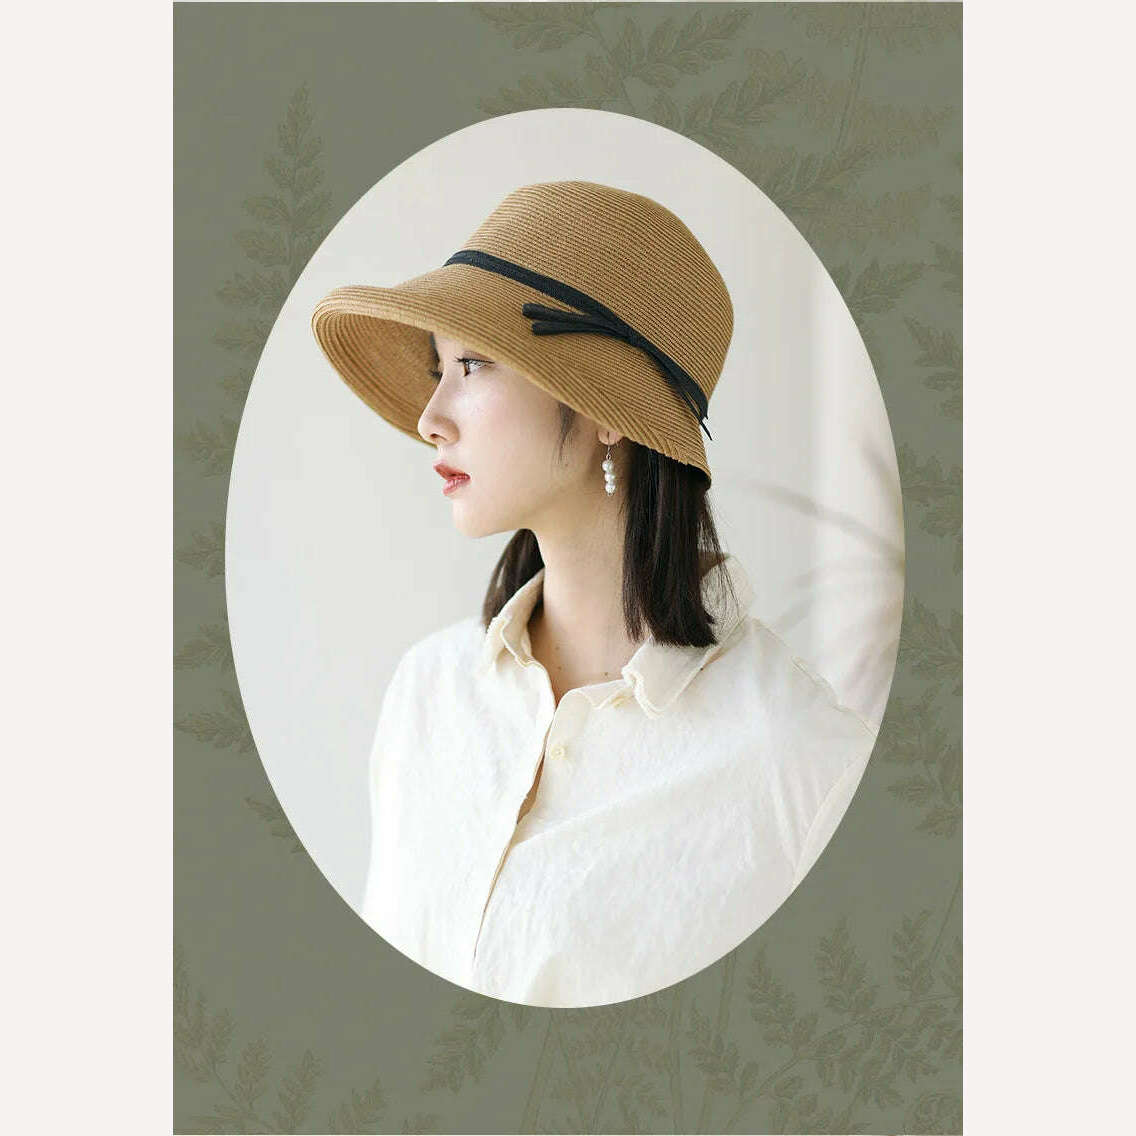 KIMLUD, Shade Straw Hat For Women Retro Foldable Pot Hat Literary Fisherman Hat Female Simple Sun Hat Casual Cool Hat, KIMLUD Womens Clothes